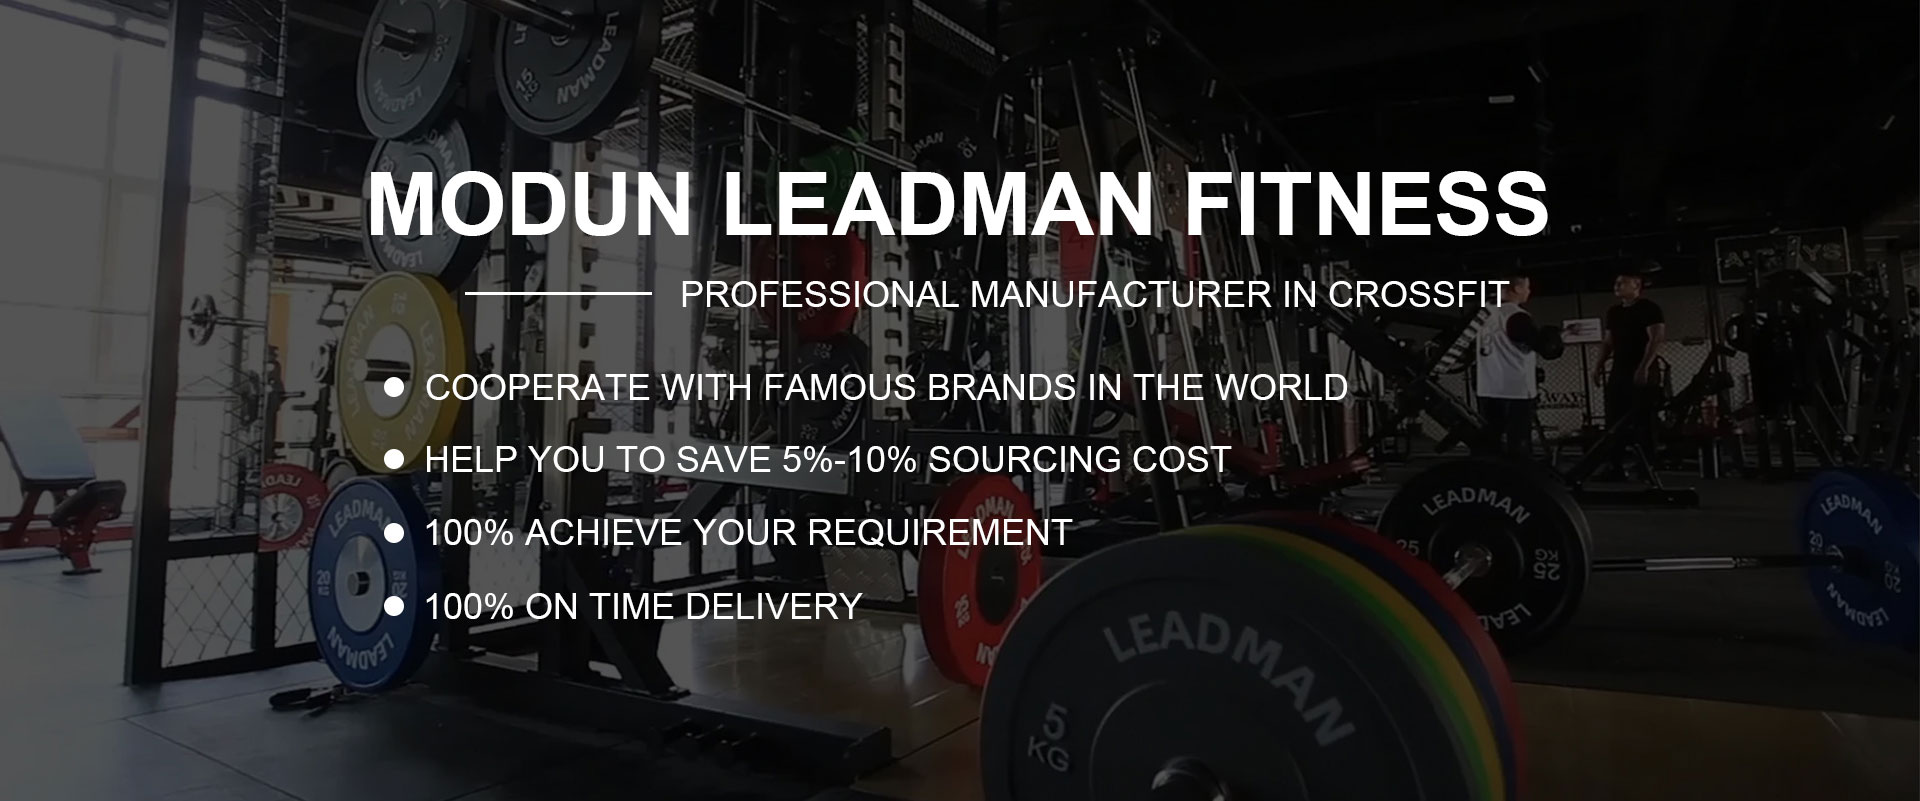 Fitness Equipment Spare Parts Suppliers|Modun Leadman Fitness